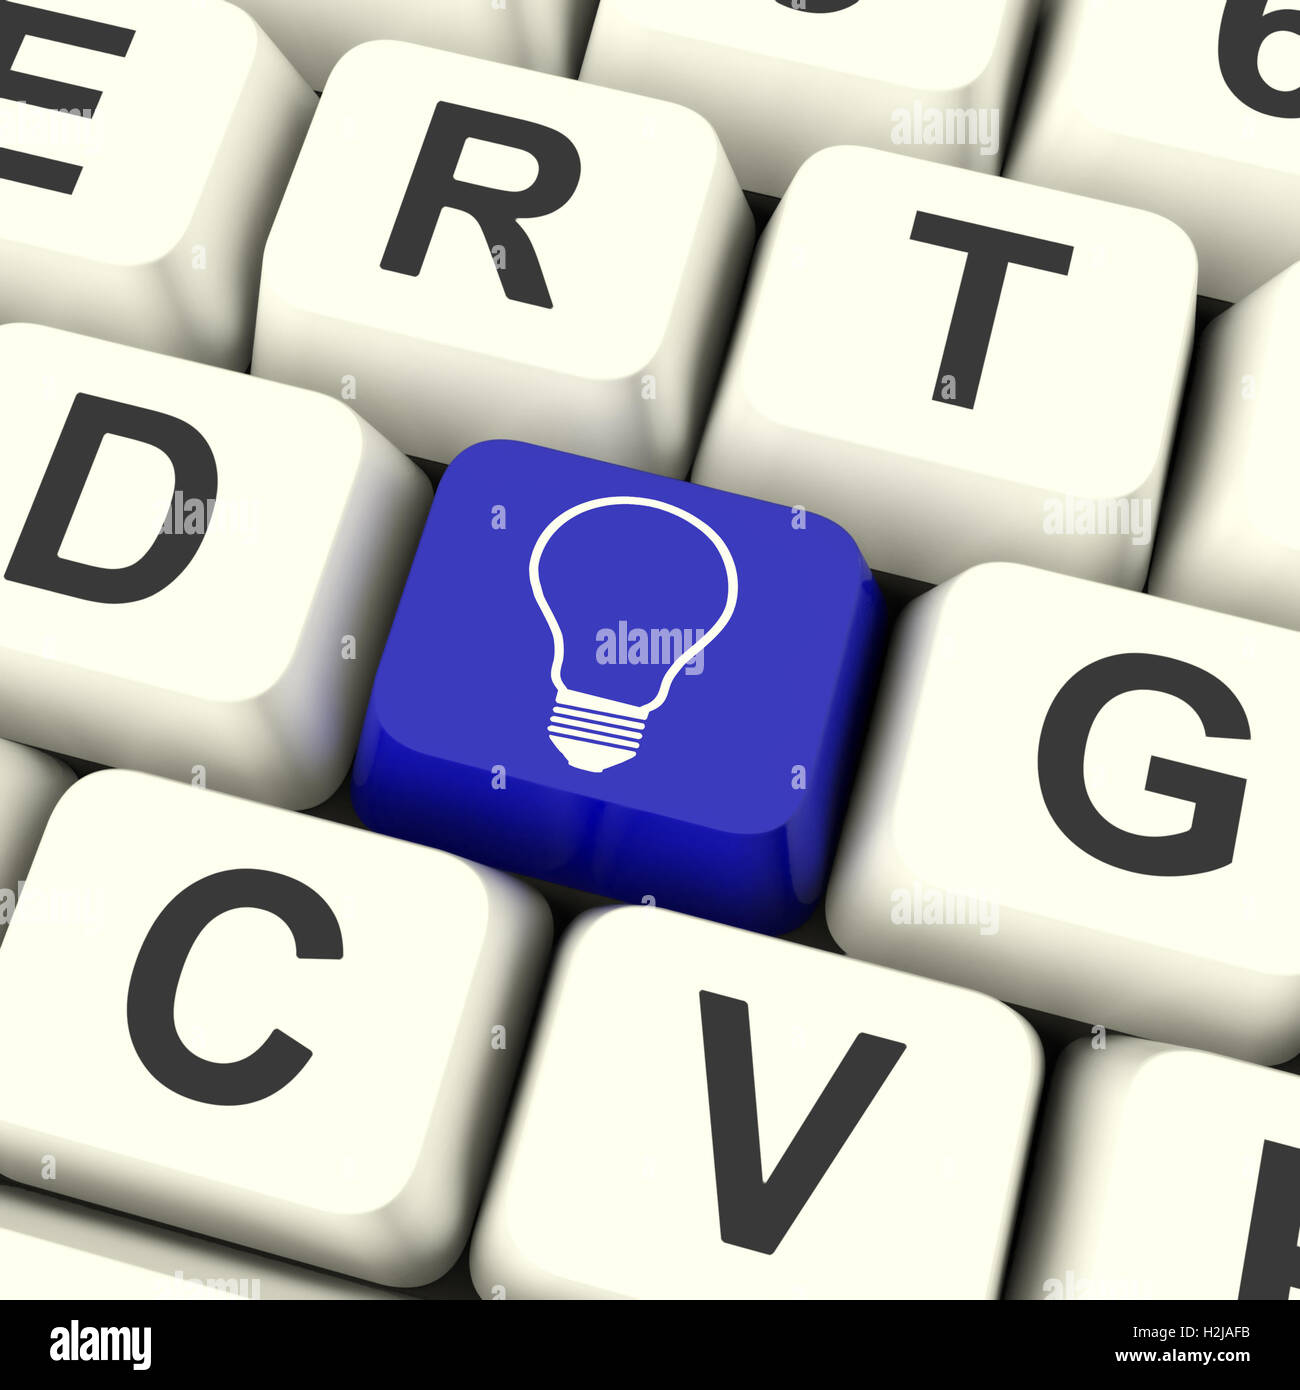 Light bulb Key Means Bright Idea Innovation Or Invention Stock Photo